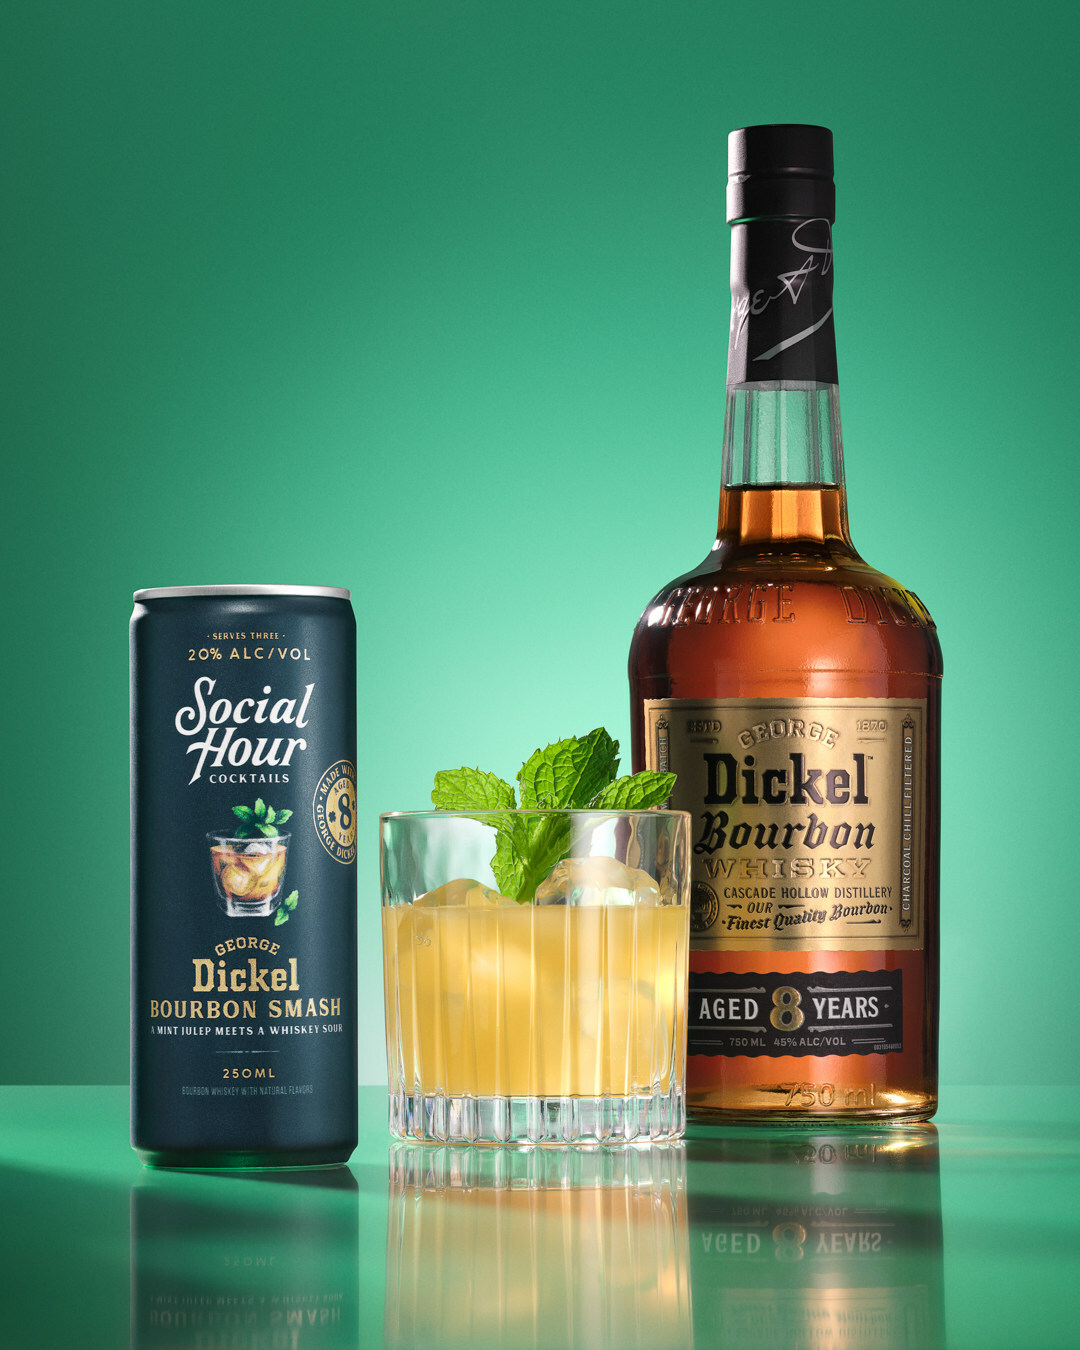 Your New Summer Cocktail: The George Dickel Bourbon Smash